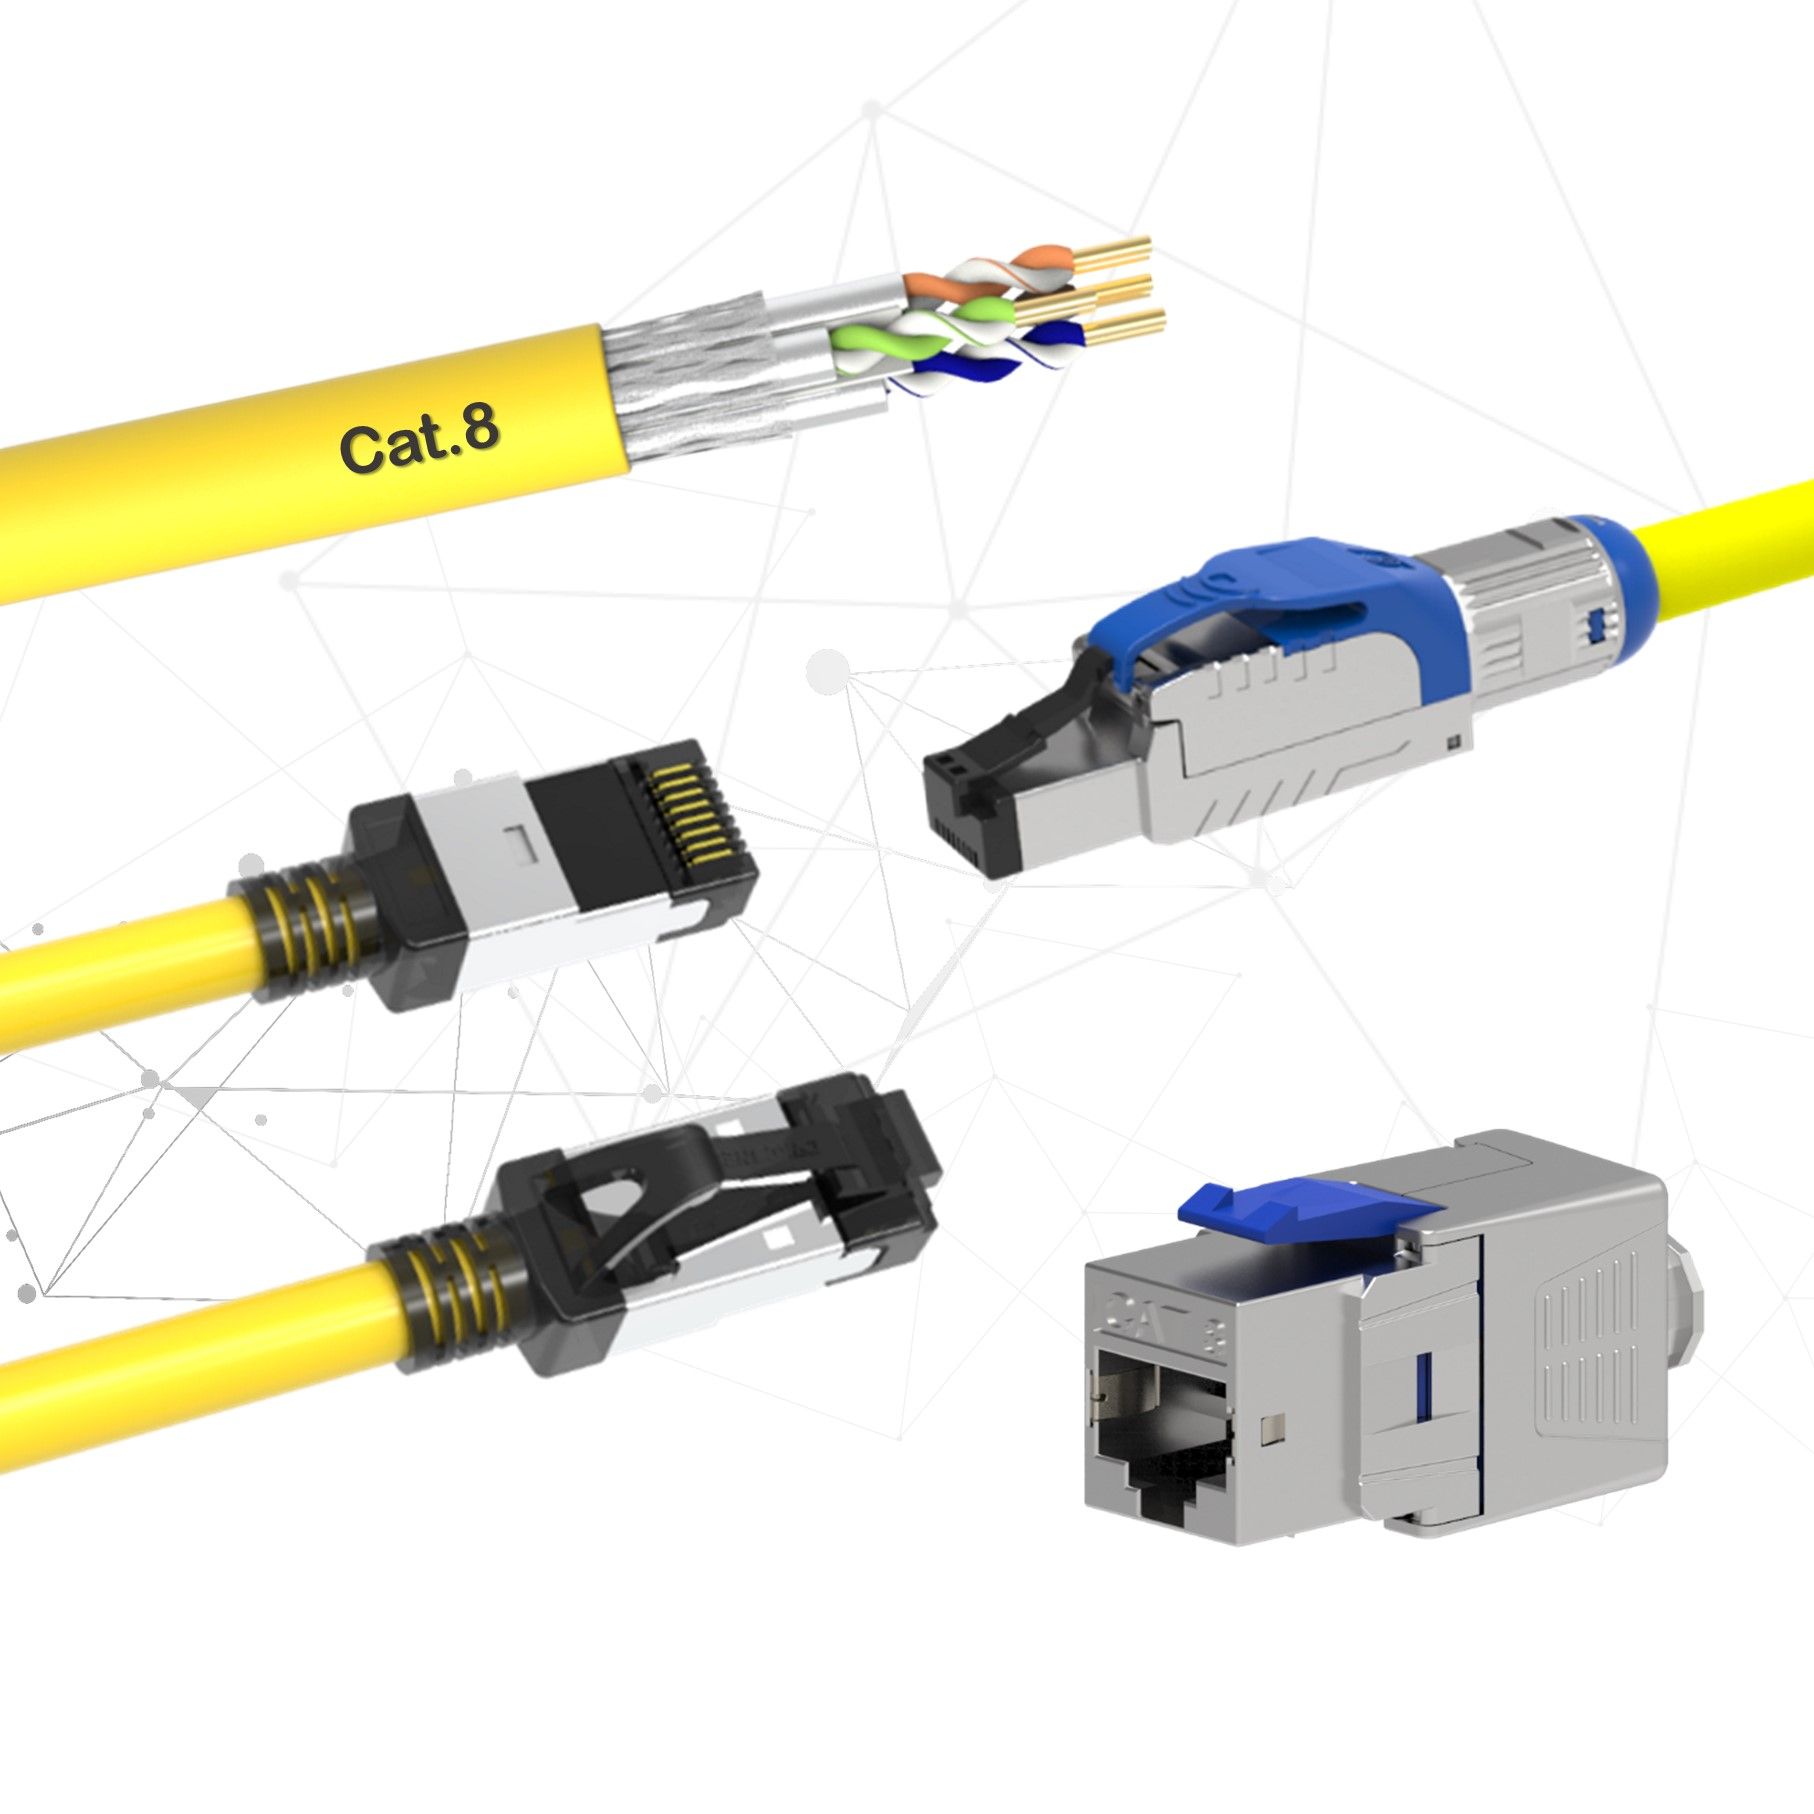 Cat8 Structured Cabling Ethernet 40G High Speed Cat8